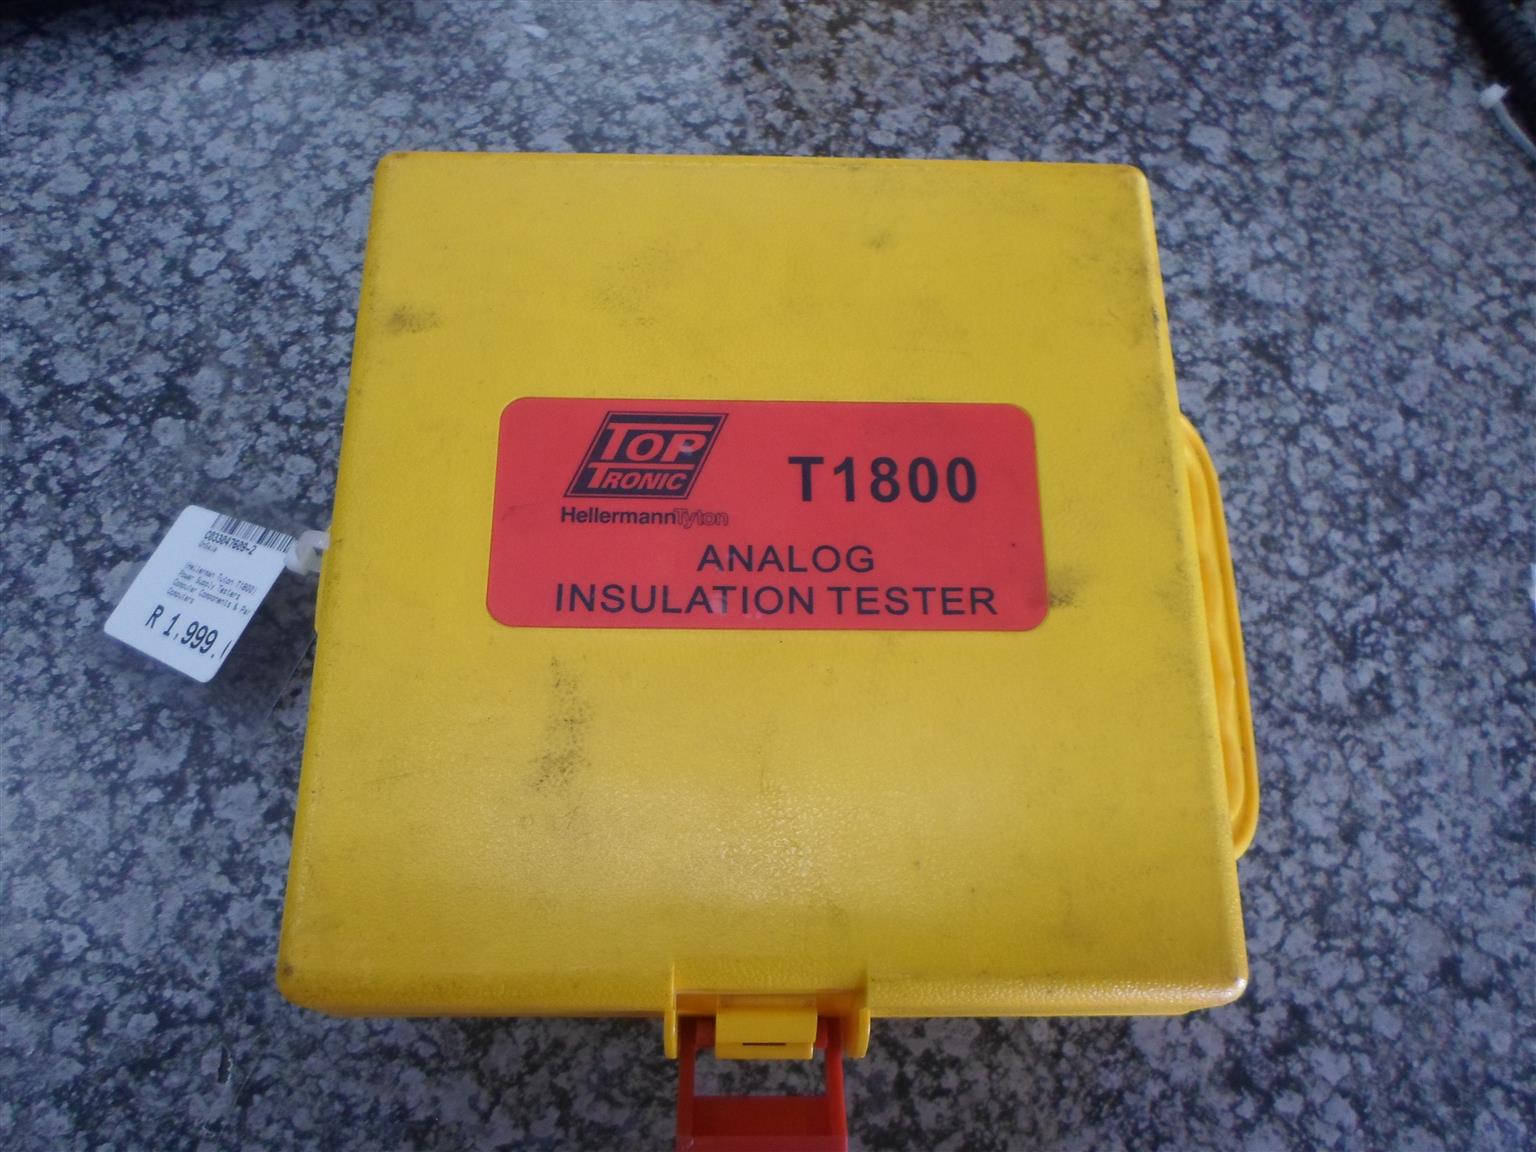 Top Tronic T1800 Analog Insulation Tester